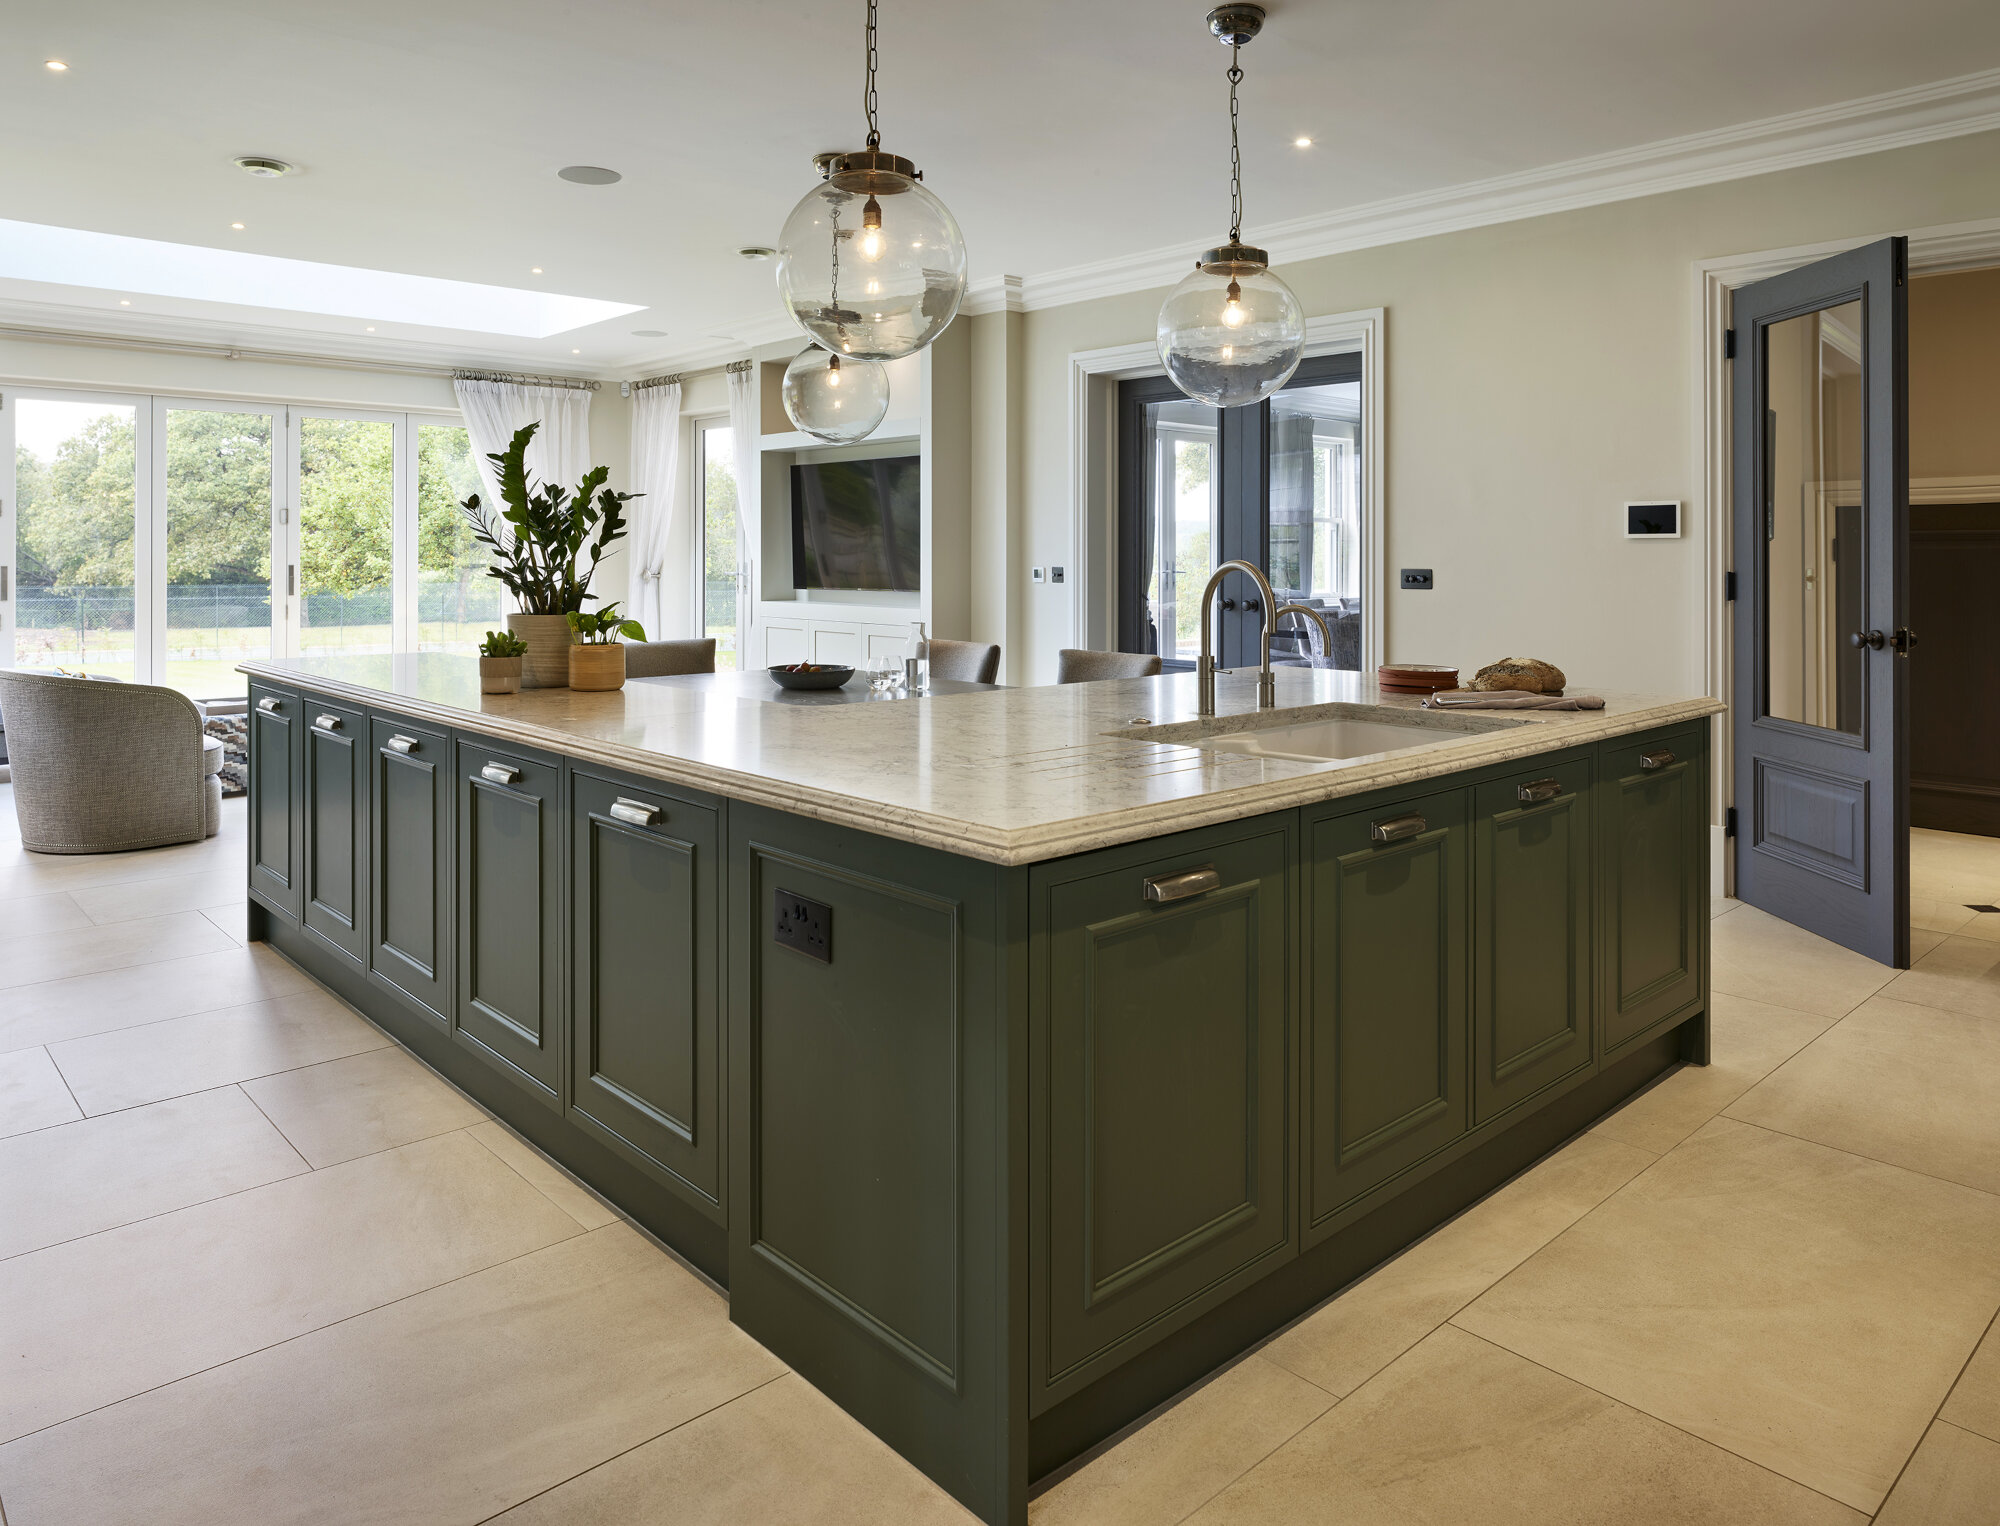 High End traditional Kitchens In North Hykeham